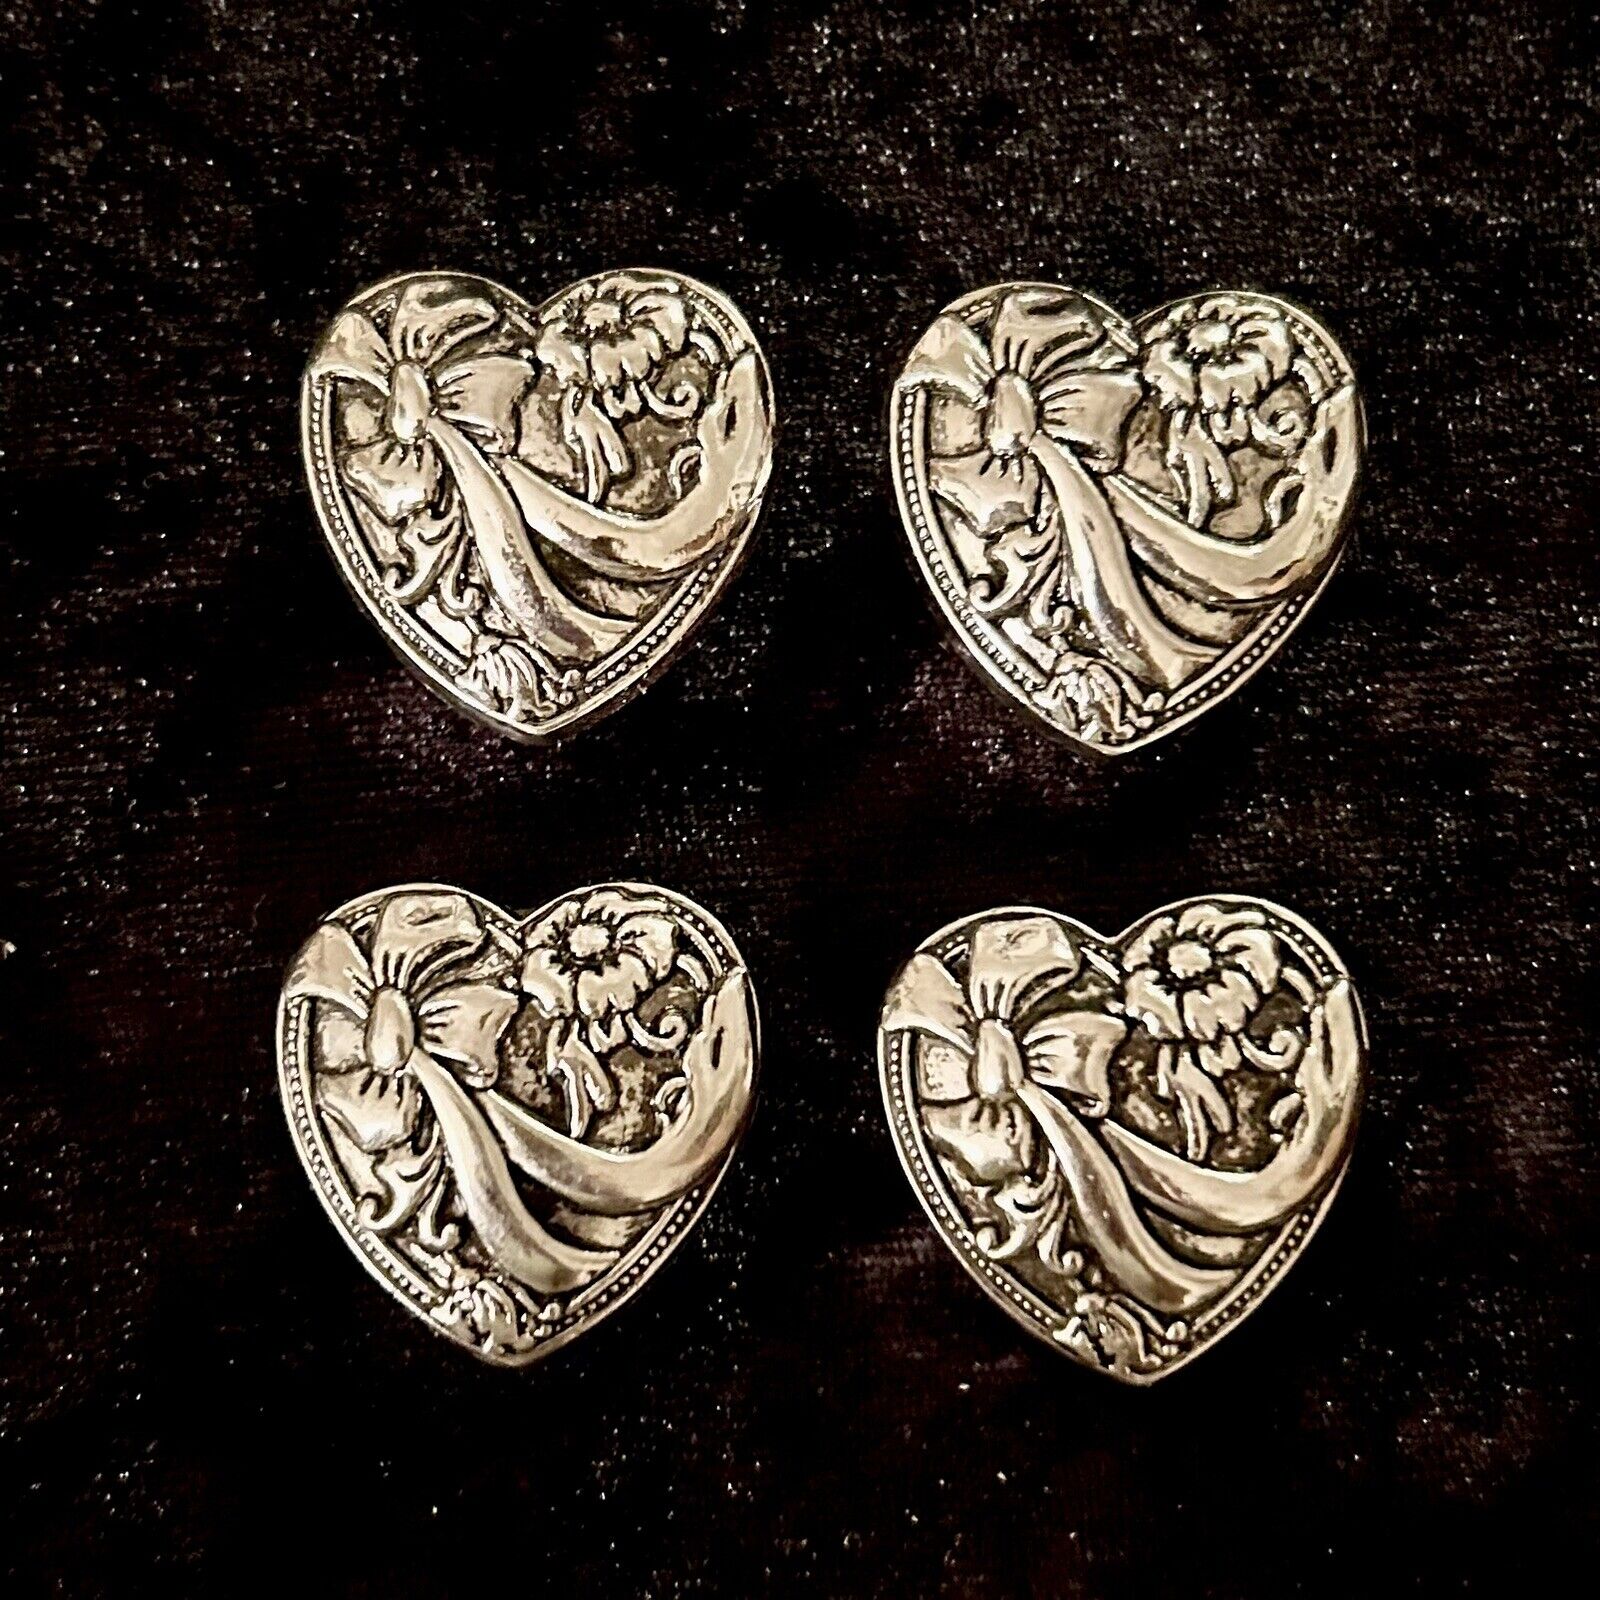 4 Vintage Button Covers Heart Shaped Floral Pattern Flower Ribbon Bow Silvertone